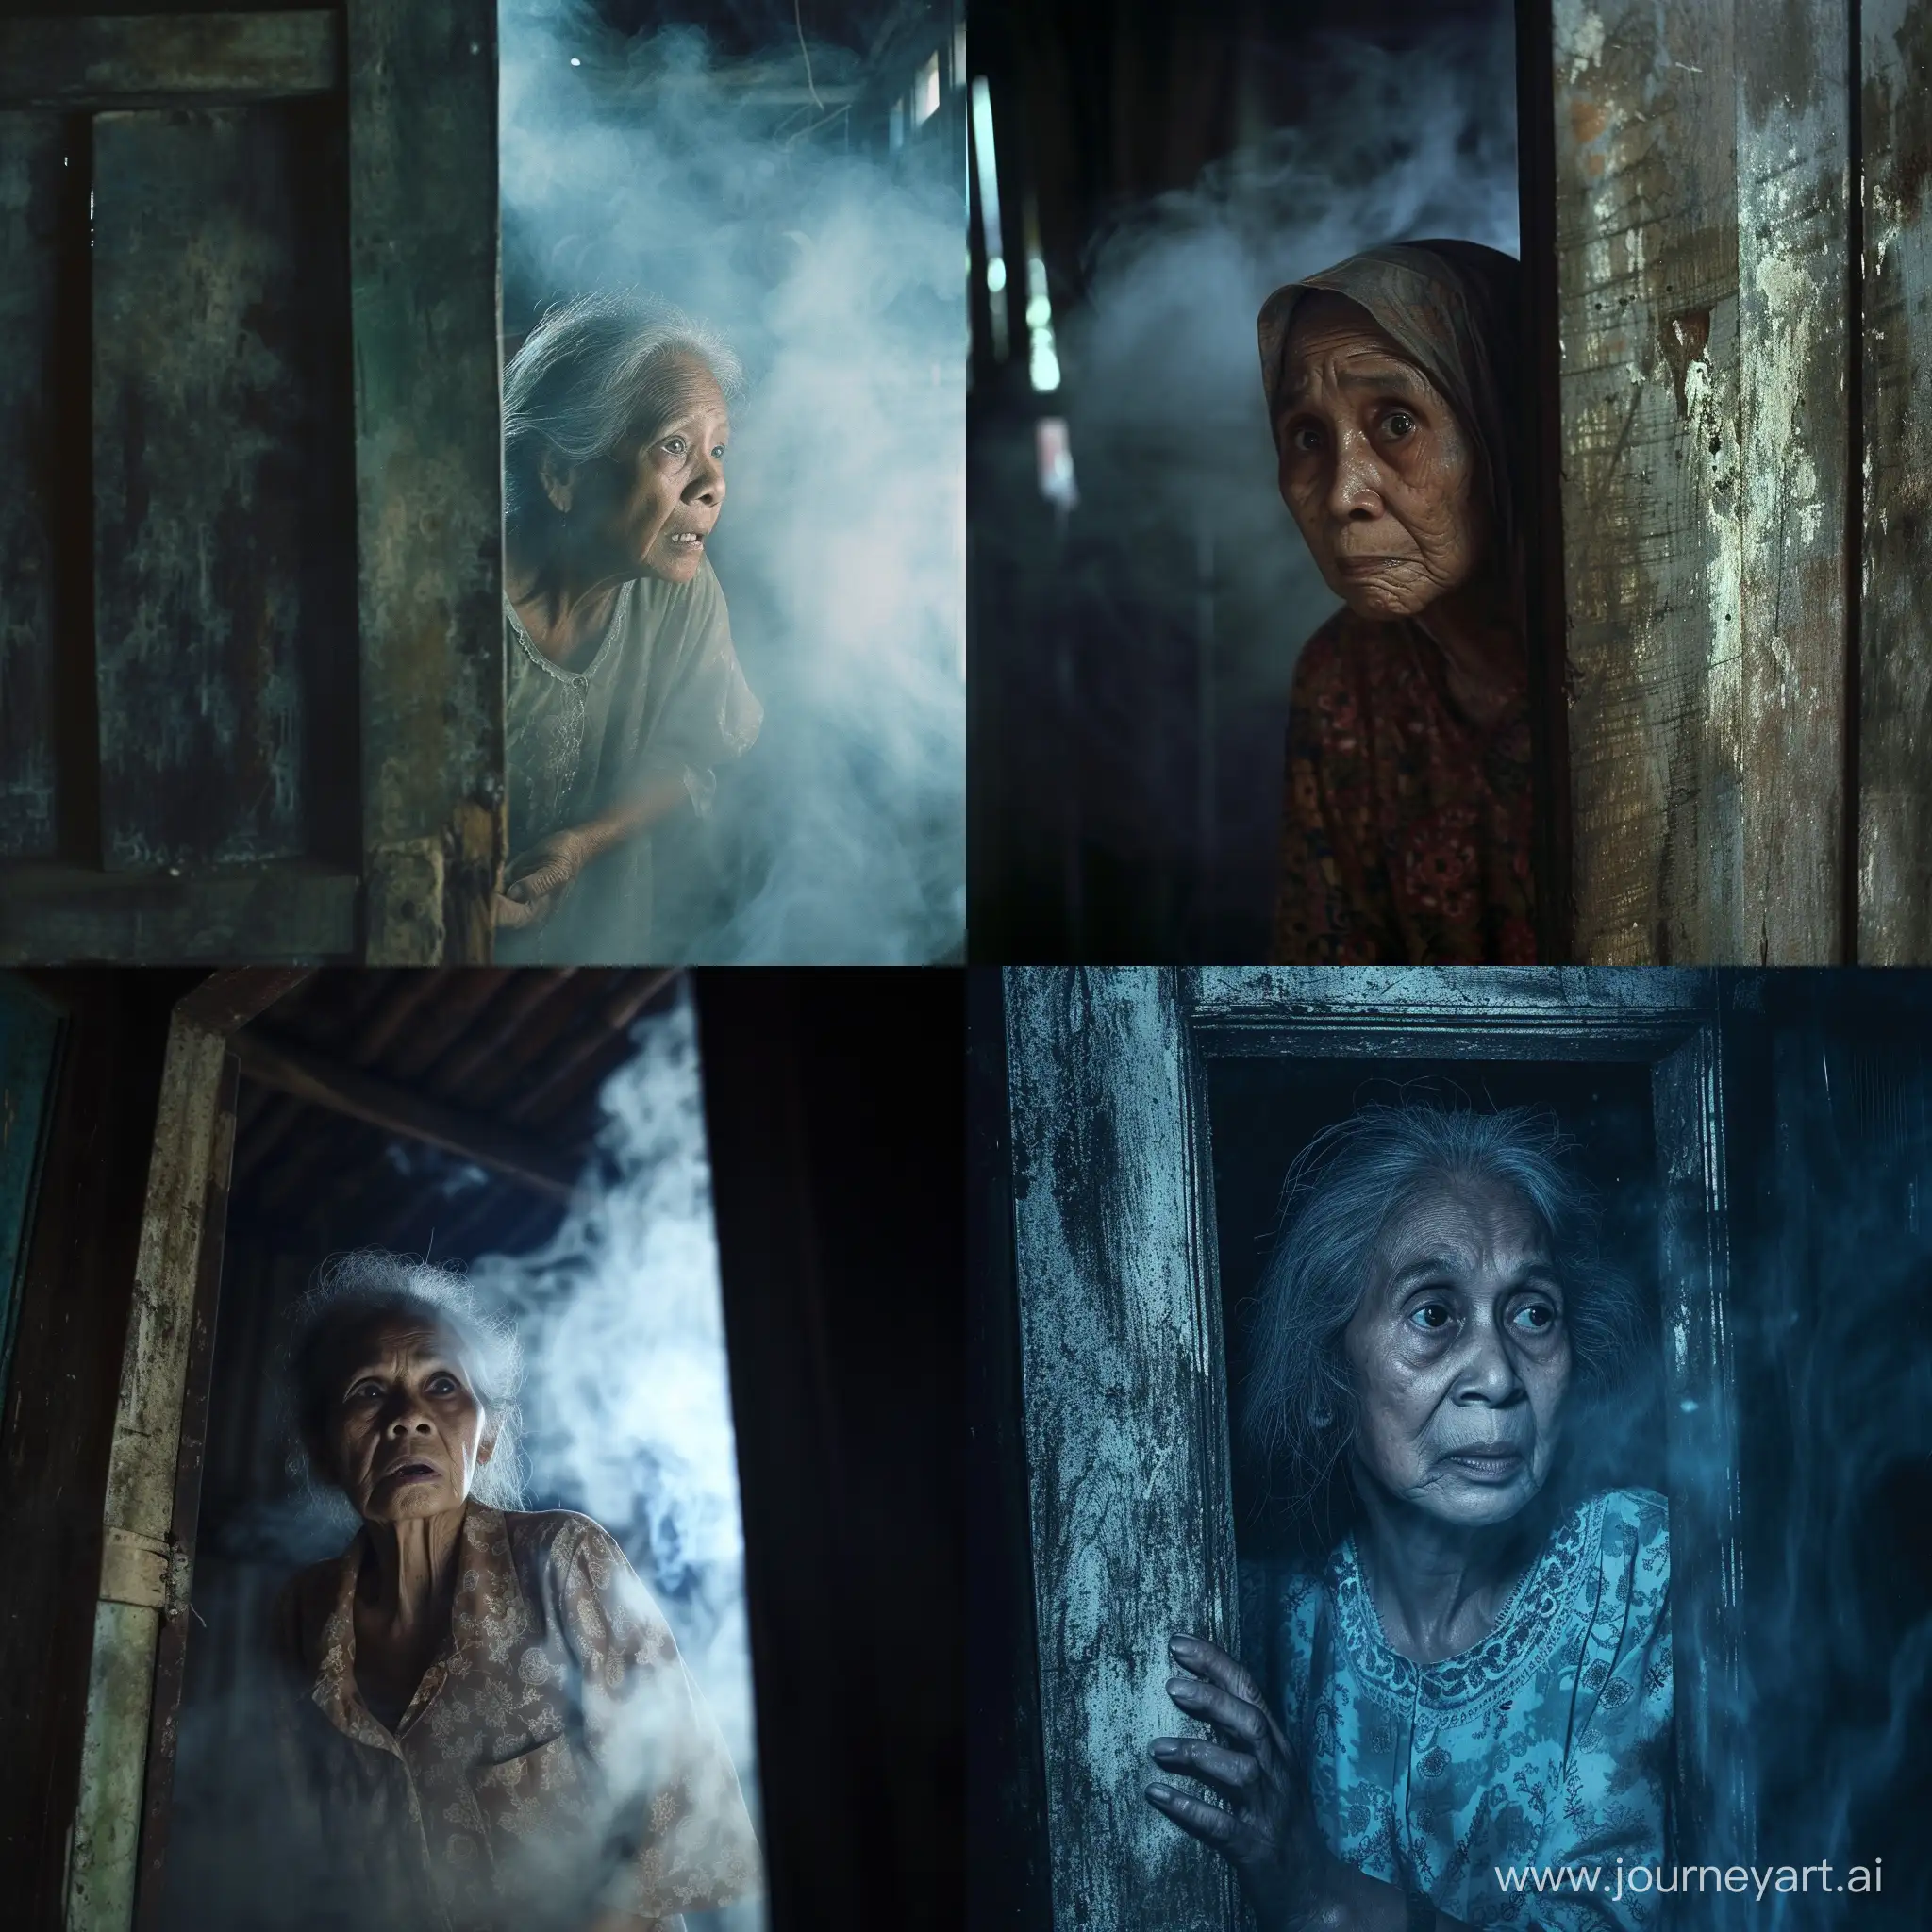 The ghost of an old Indonesian woman appears from a dirty house warehouse, horor movie scene